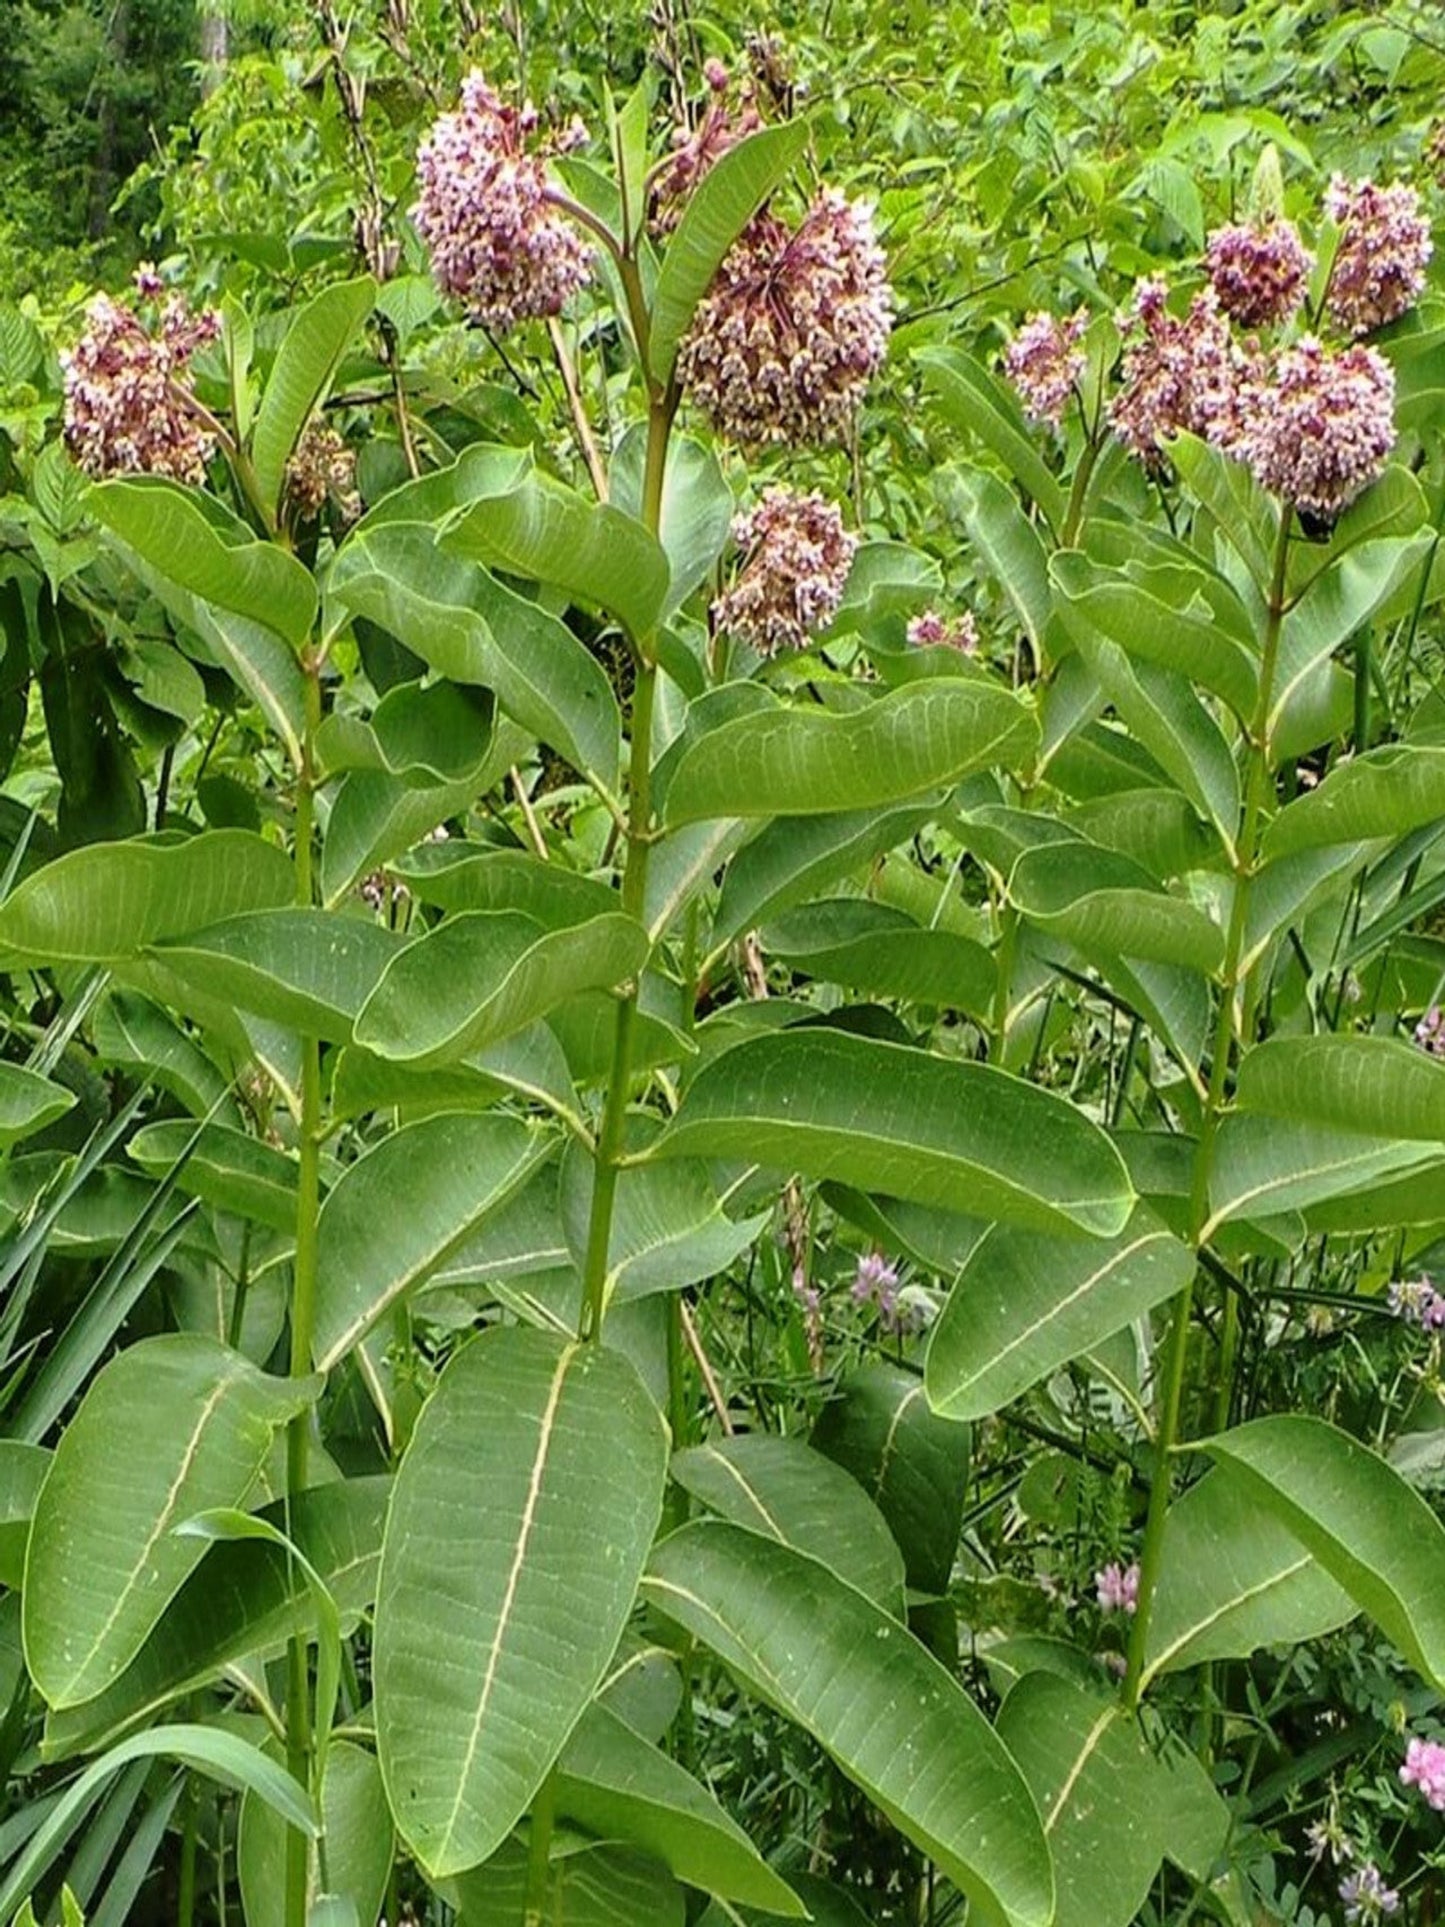 asclepias syriaca " common milkweed" host plant for monarch, queen, soldier butterfly